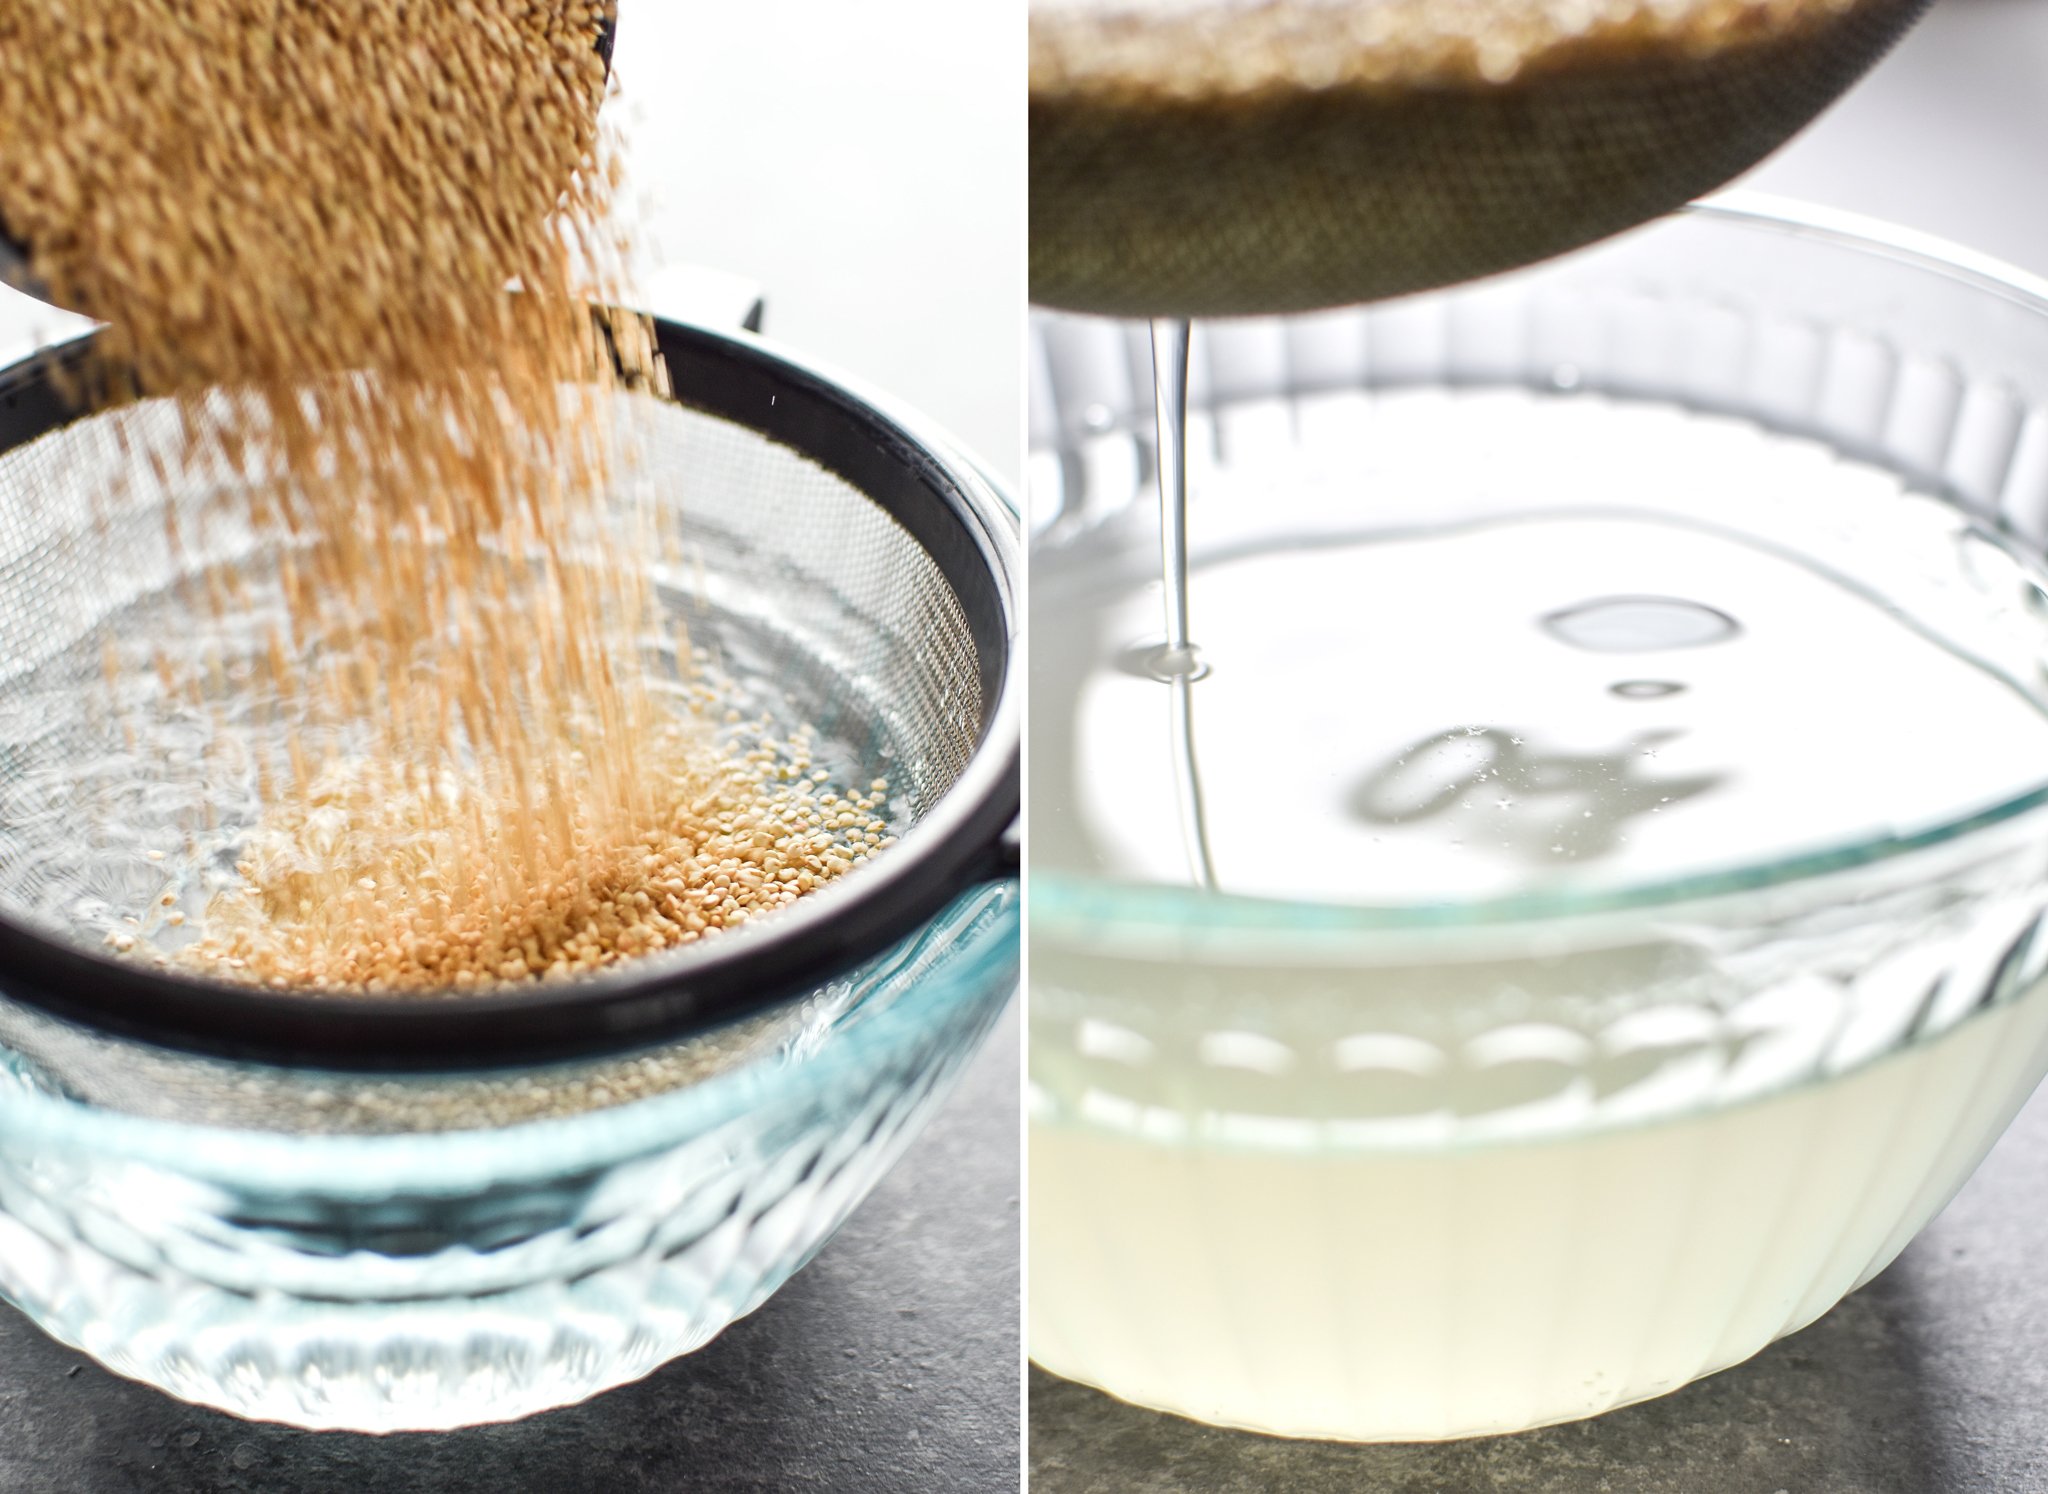 Two photos; Left- quinoa being poured into a fine mesh strainer for rinsing. Right- Quinoa and strainer being lifted out of the bowl of water leaving cloudy water behind.